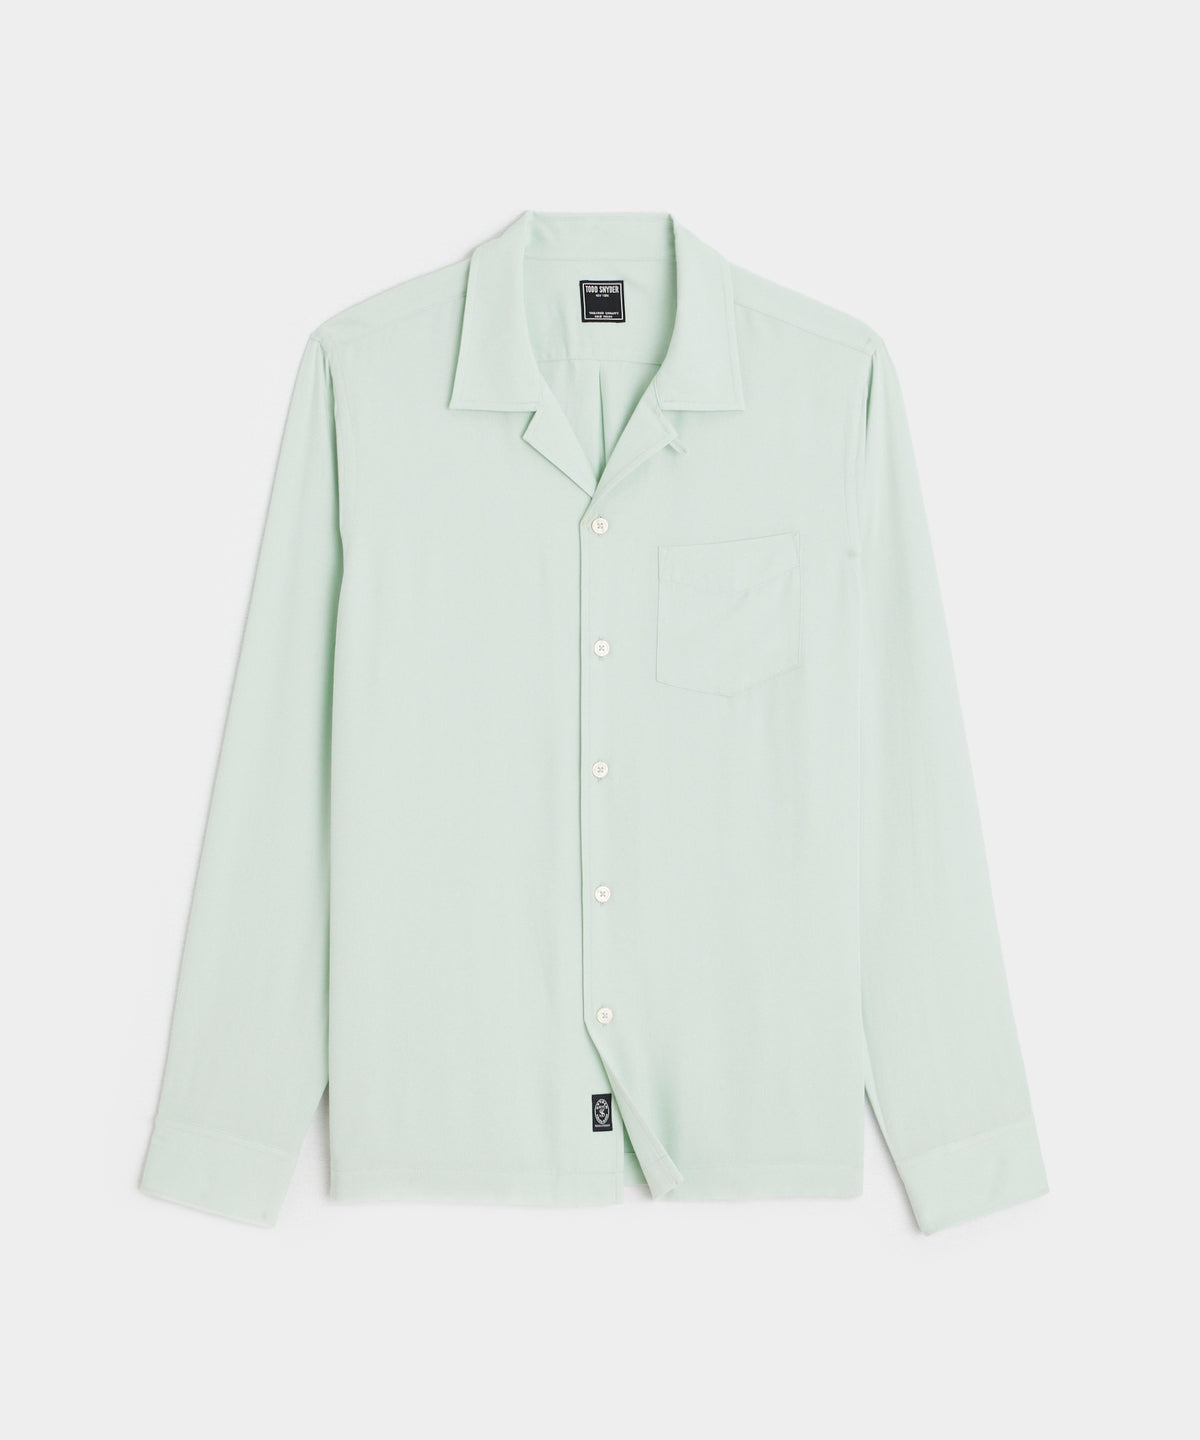 Long Sleeve Rayon Hollywood Shirt in Pale Mint